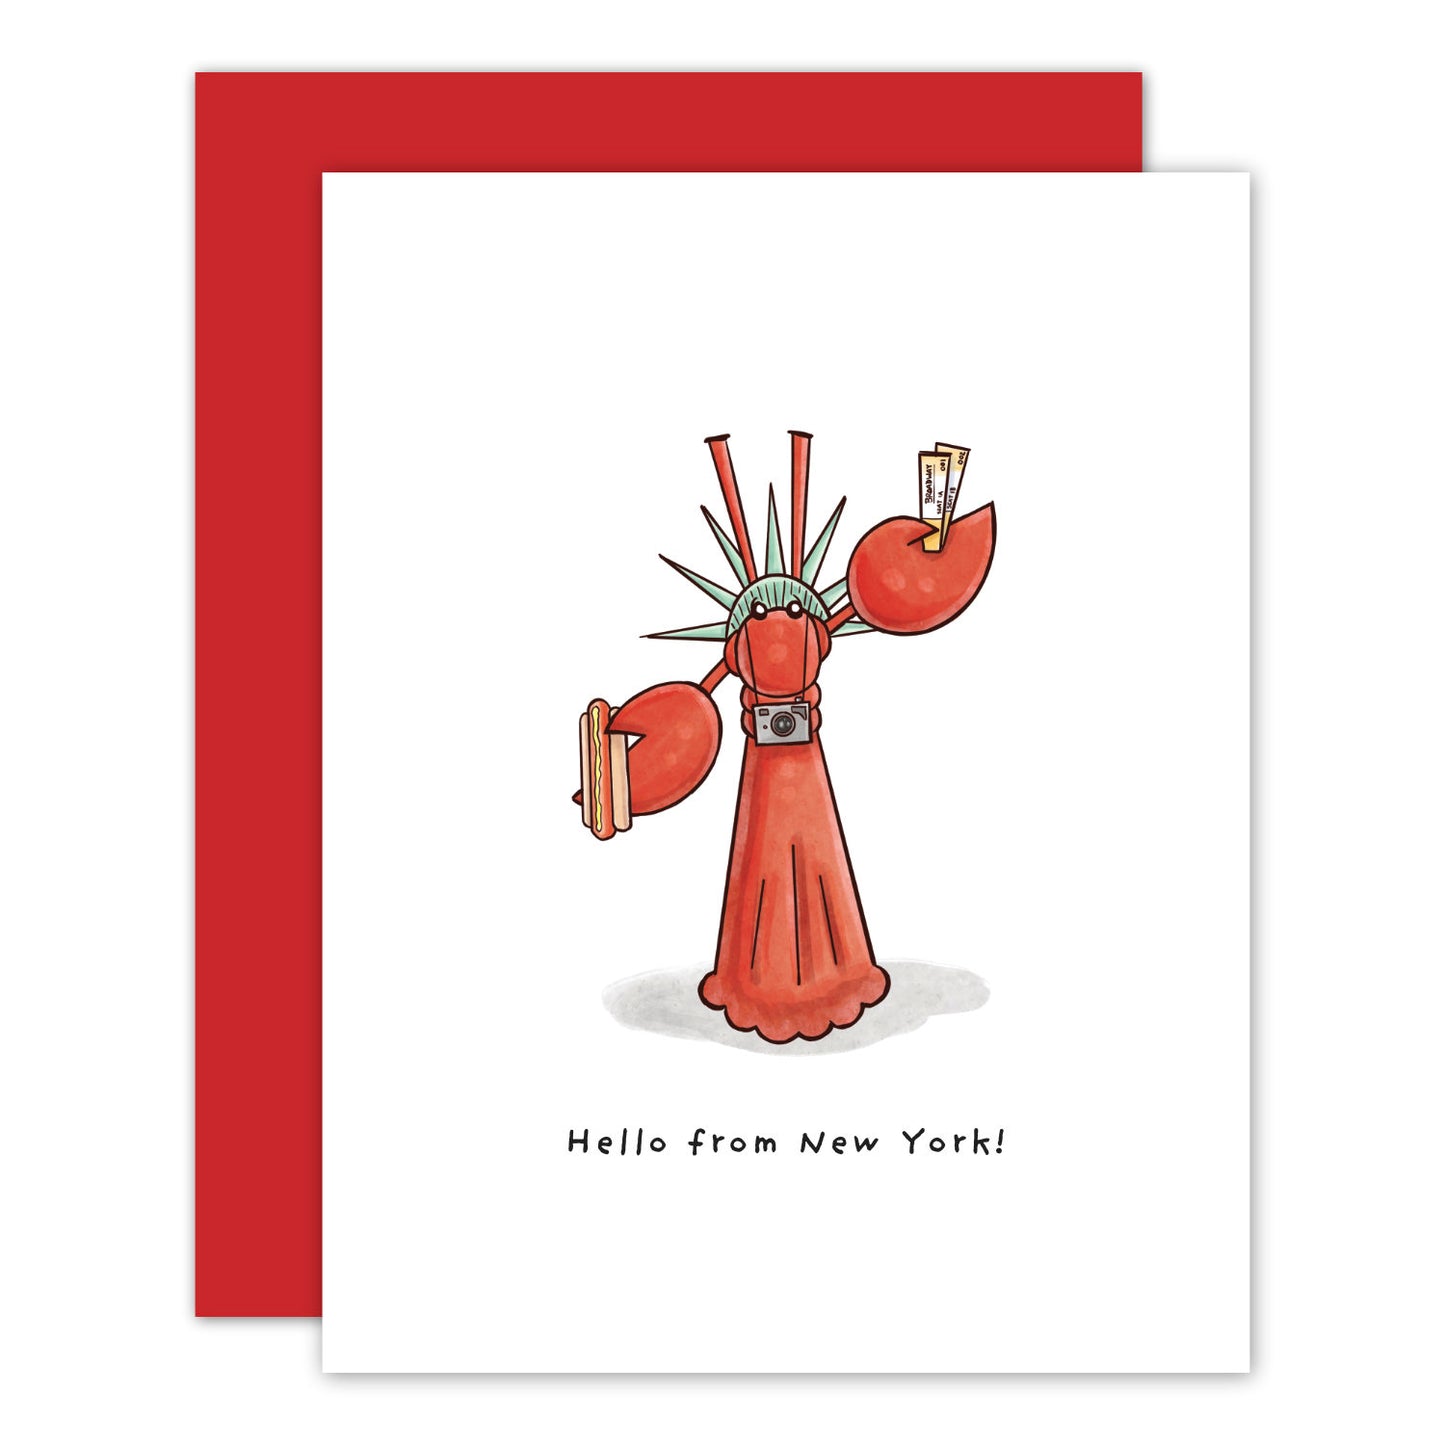 Little Lobster "Hello from New York!" Card